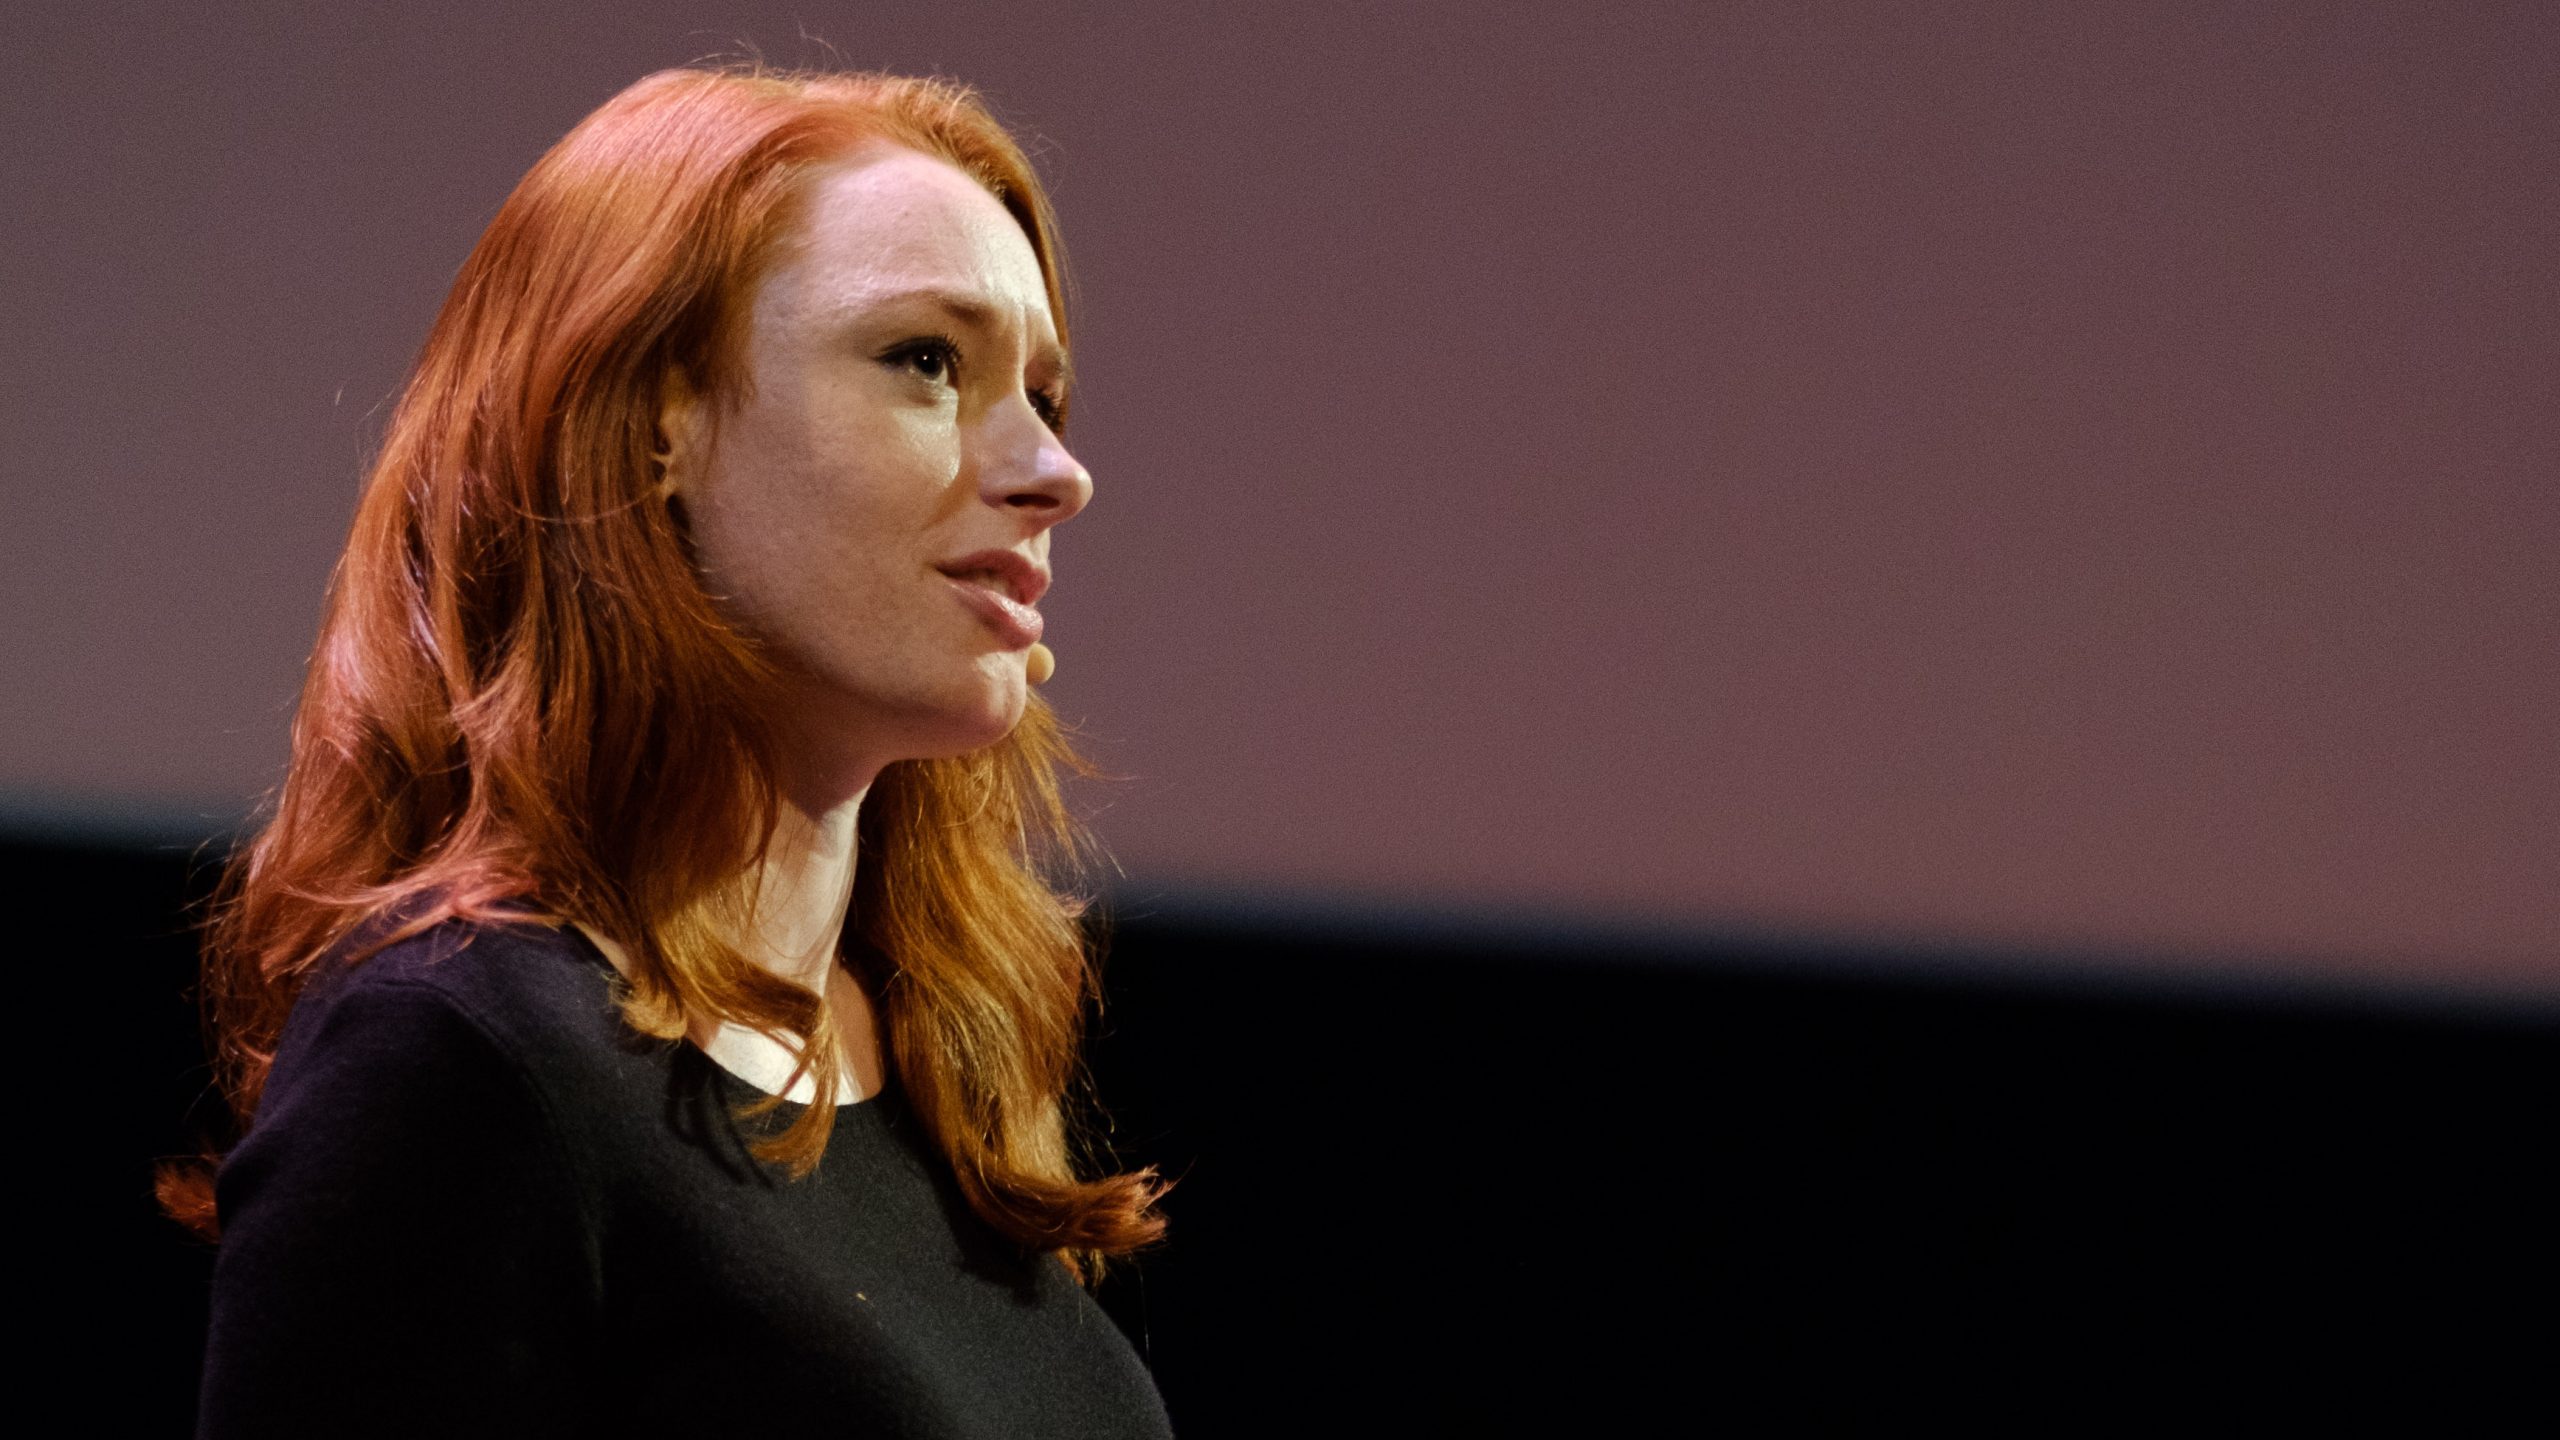 TV and radio mathematician Hannah Fry has resigned as a trustee of the Science Museum Group